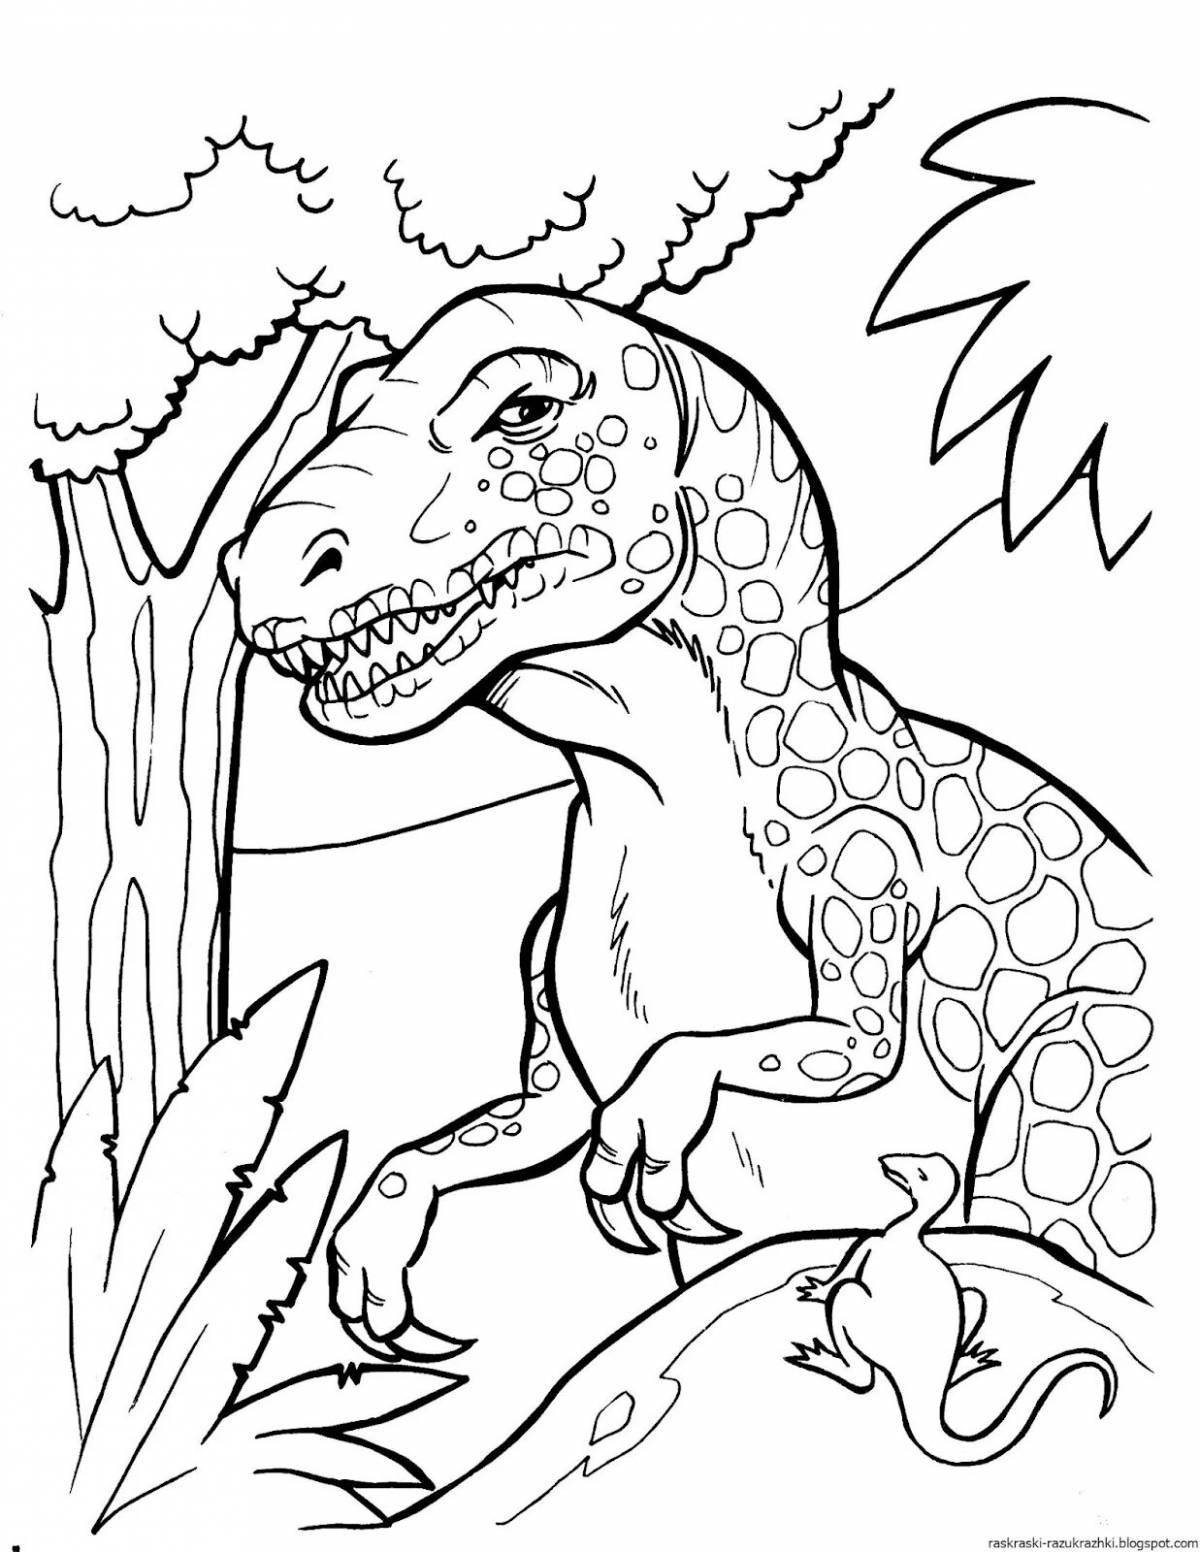 Colorful dinosaurs coloring for children 5 years old